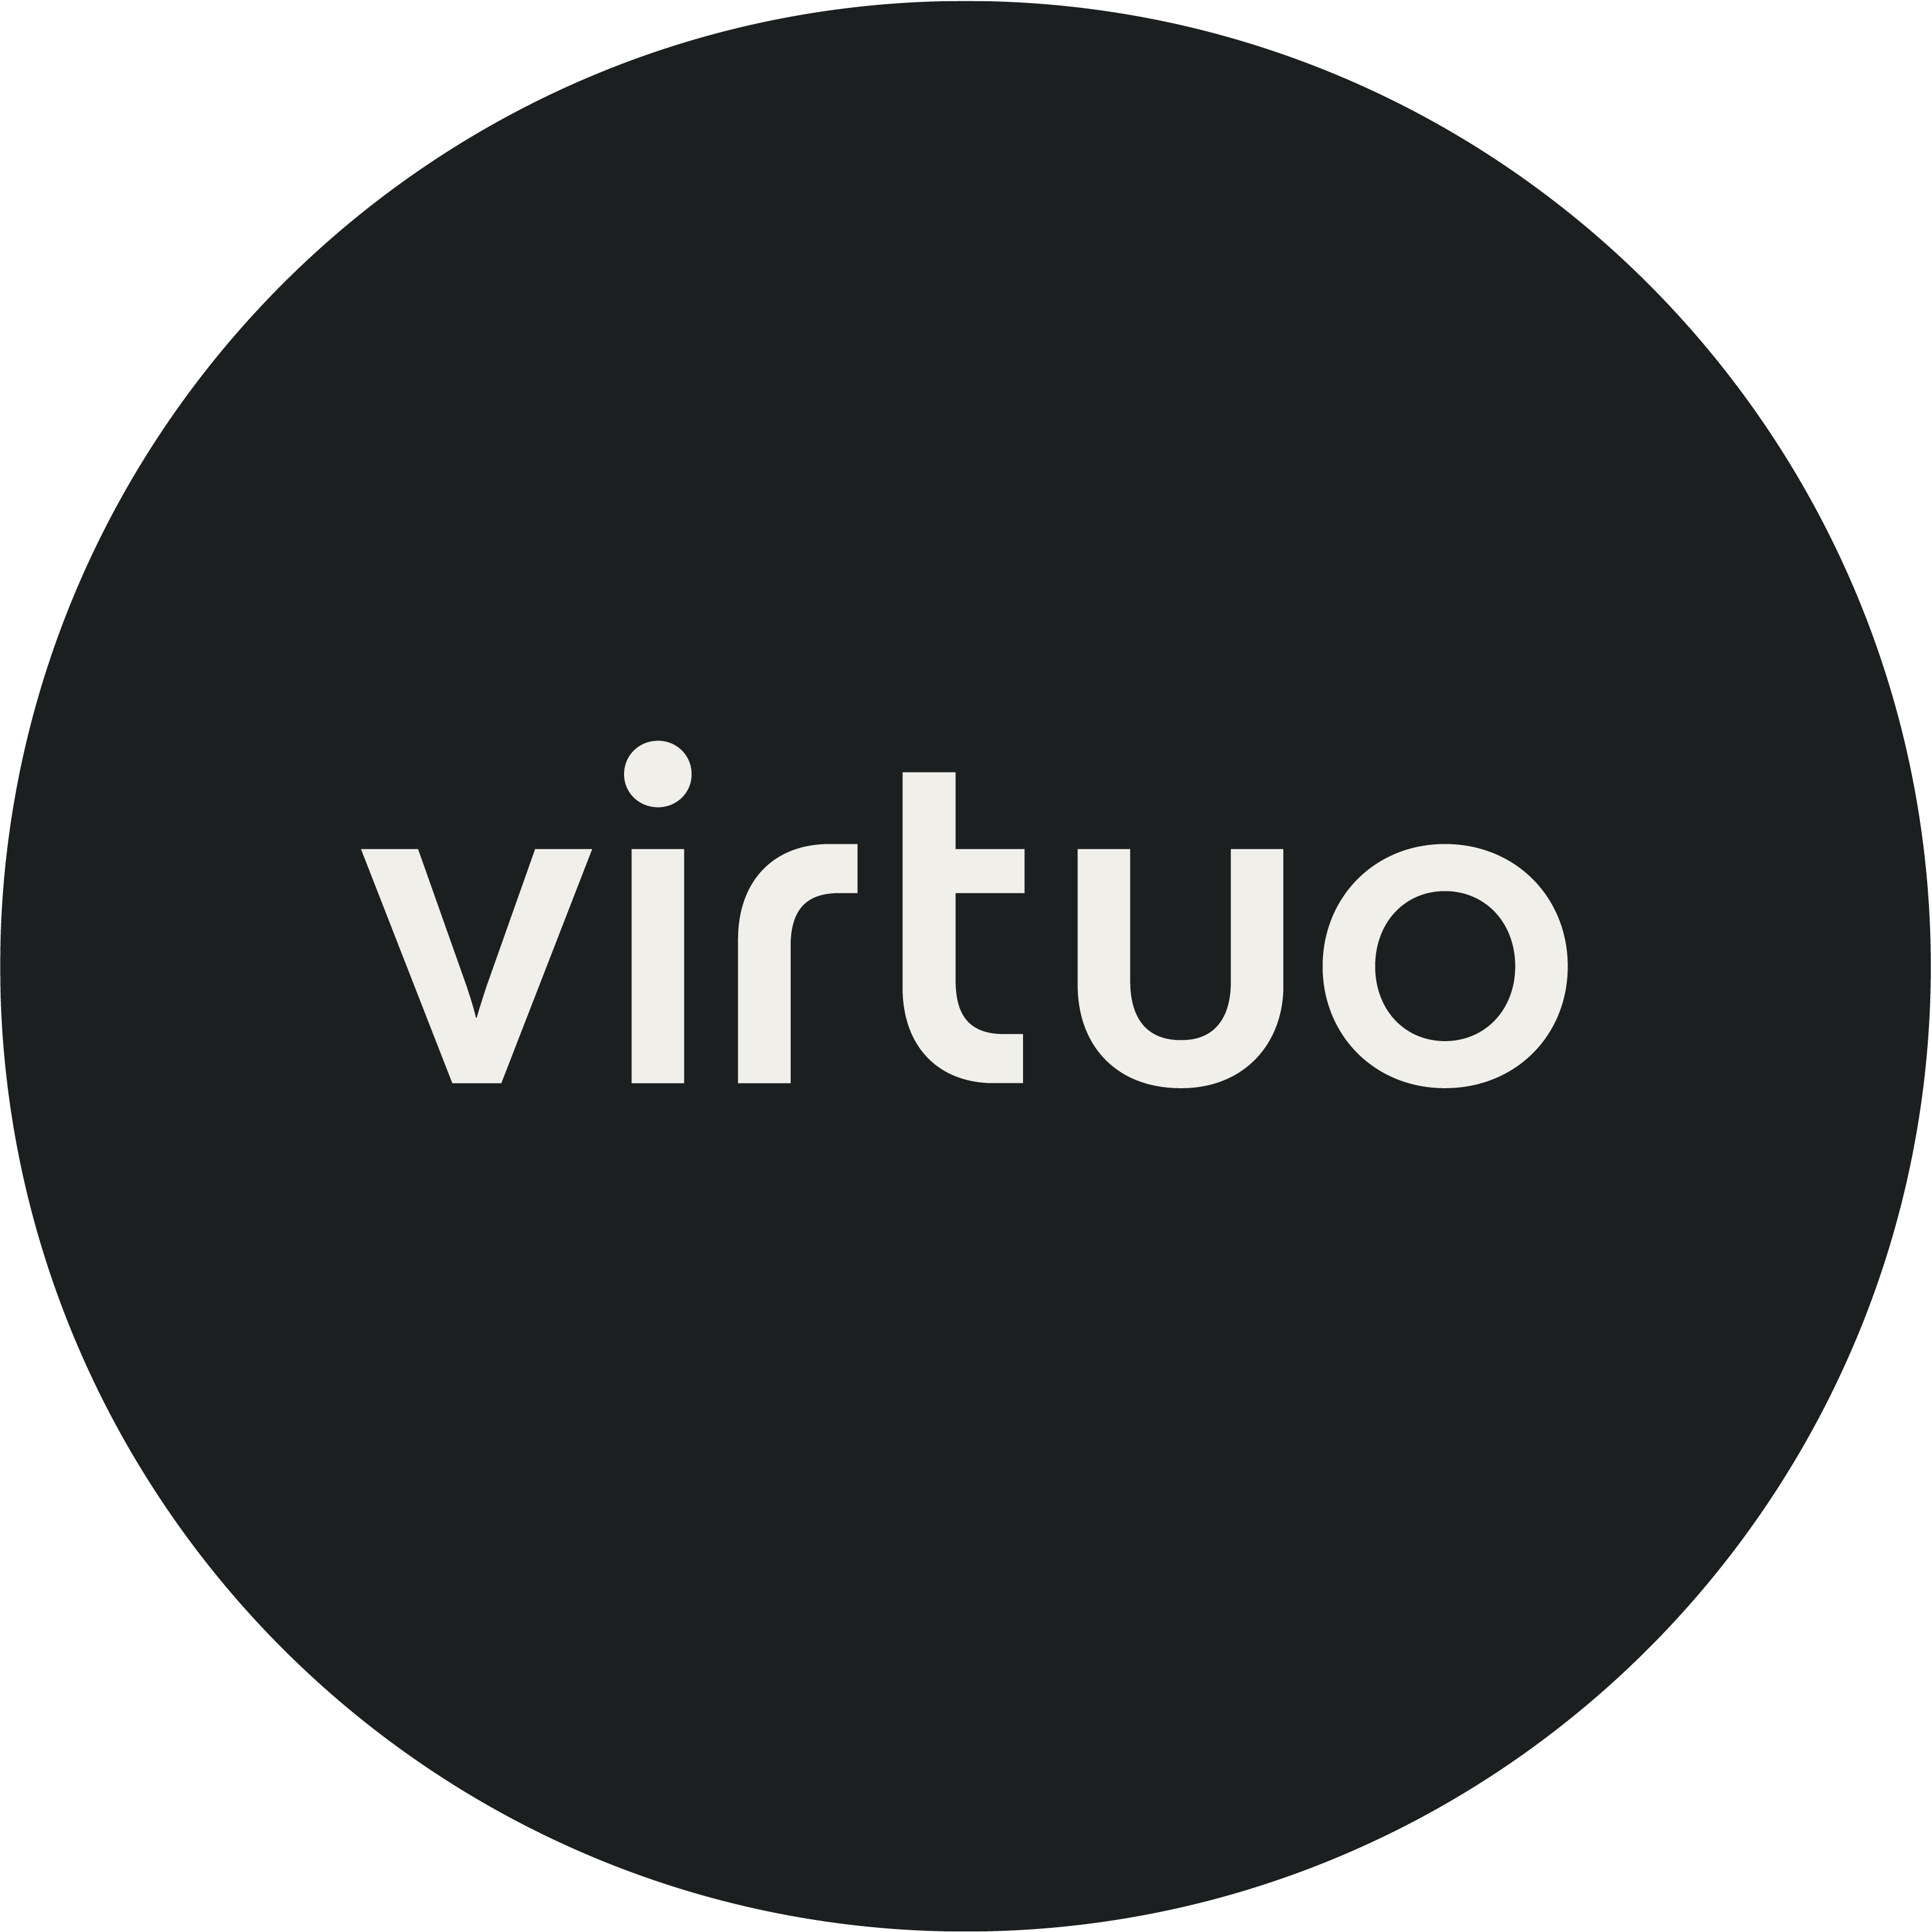 You are currently viewing Virtuo